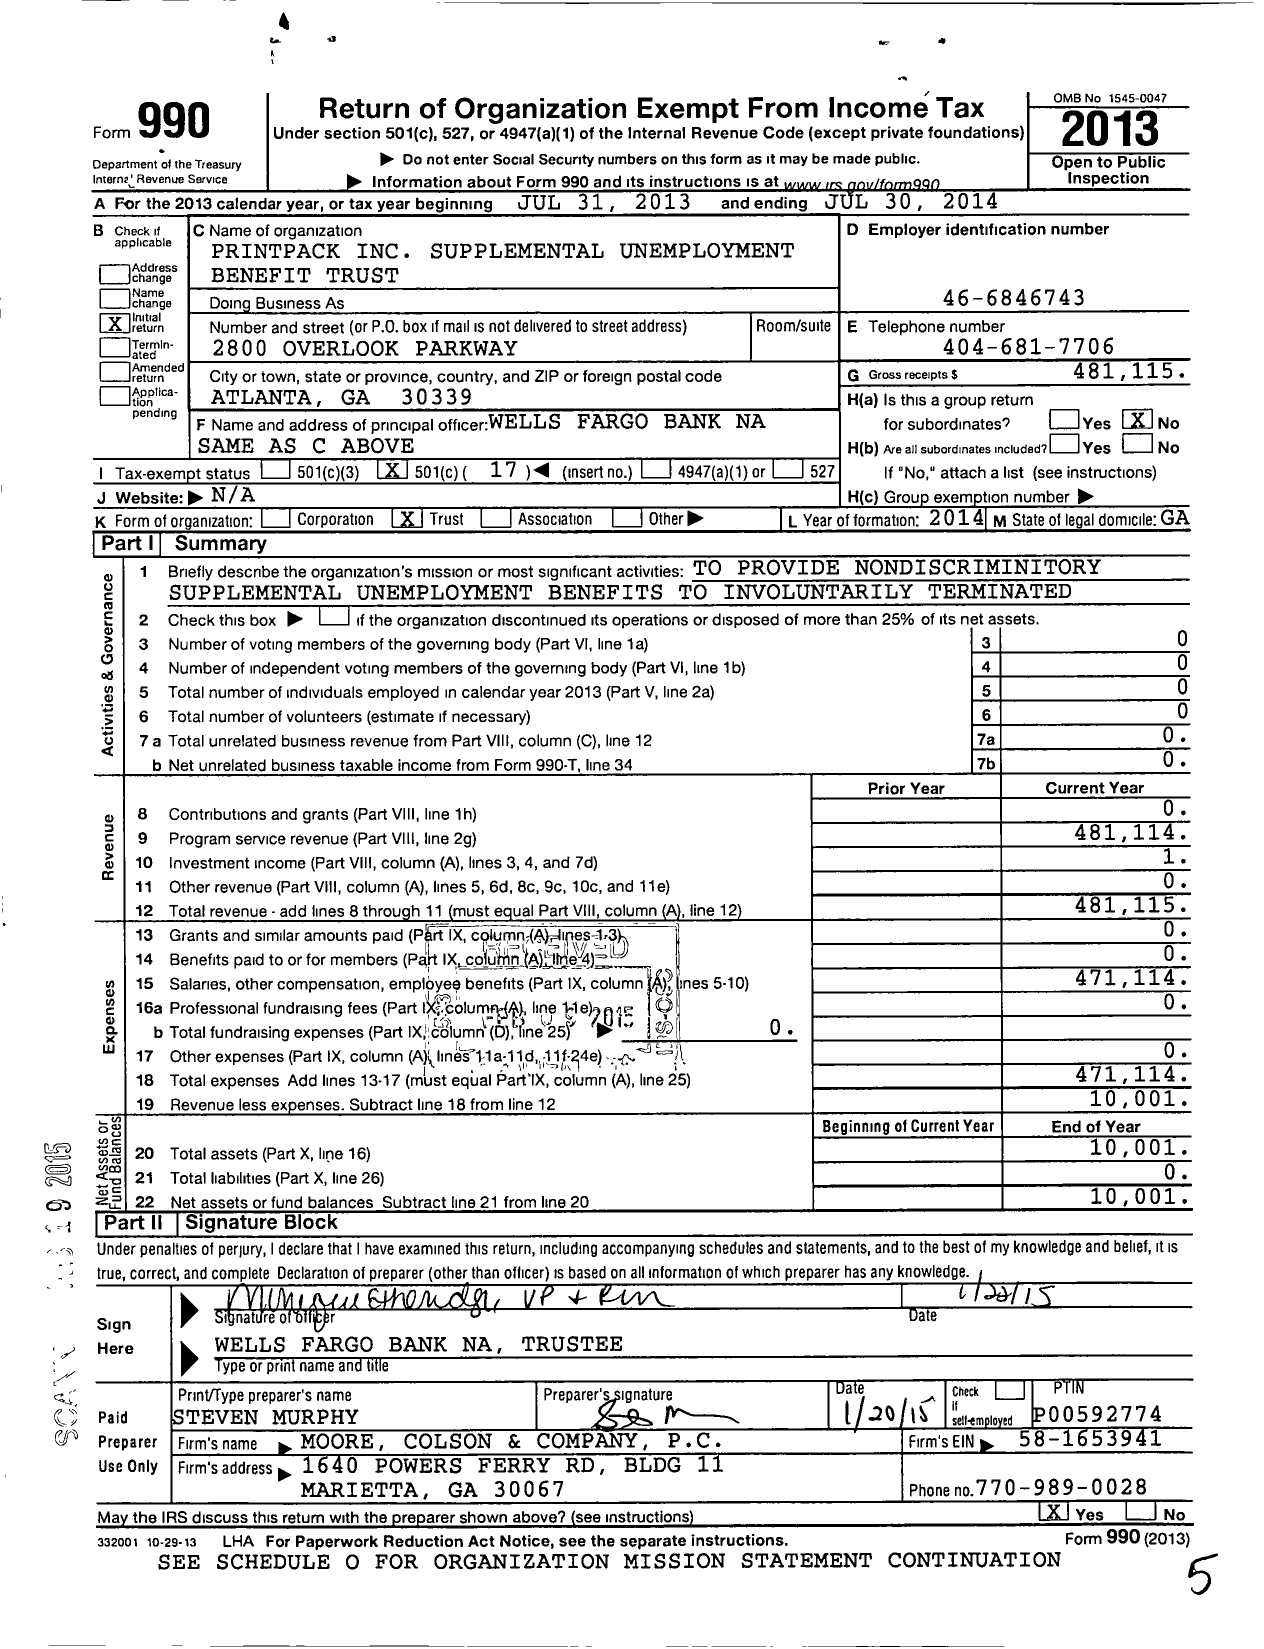 Image of first page of 2013 Form 990O for Printpack Supplemental Unemployment Benefit Trust